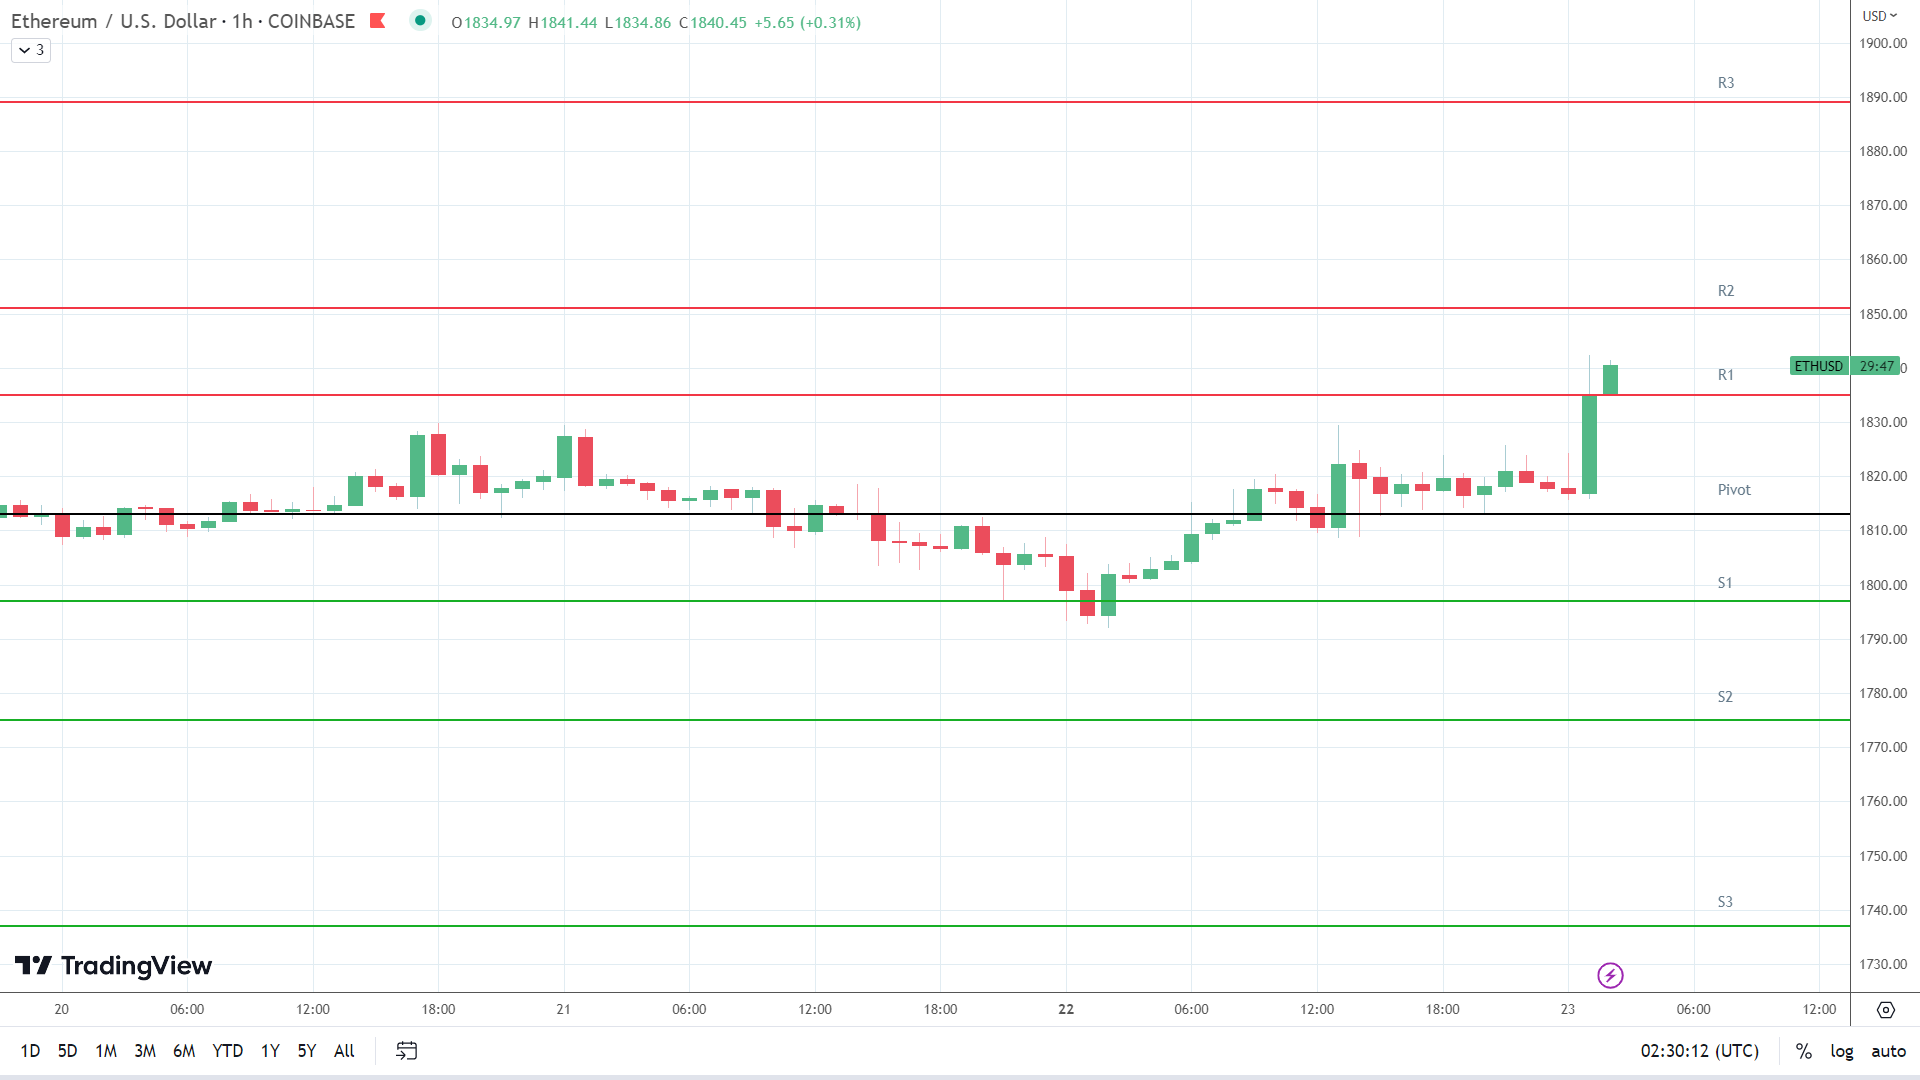 ETH resistance levels were in play early.